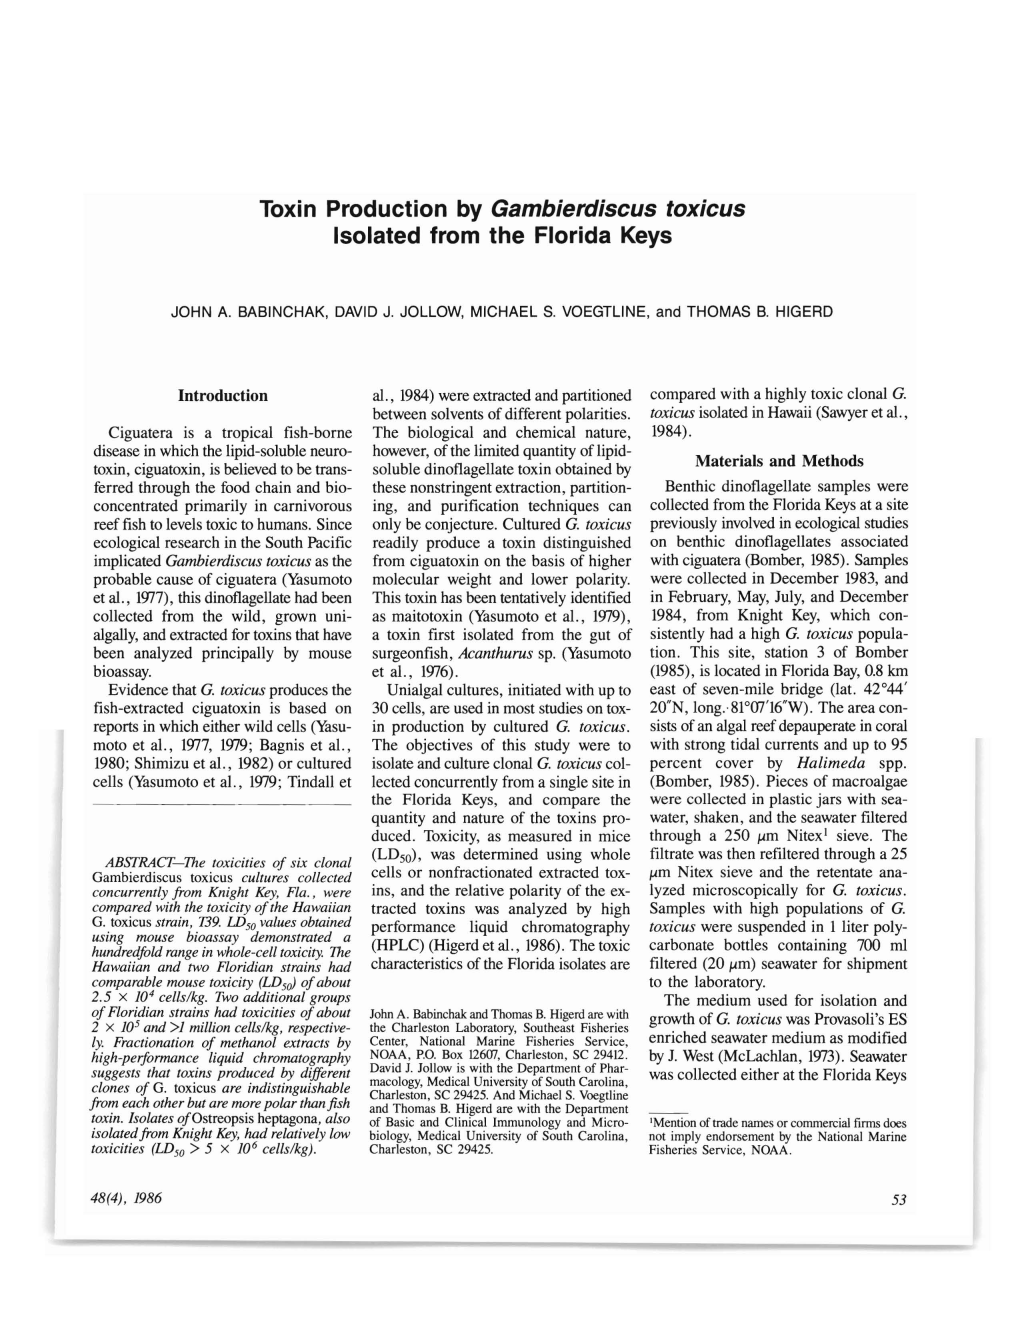 Toxin Production by Gambierdiscus Toxicus Isolated from the Florida Keys